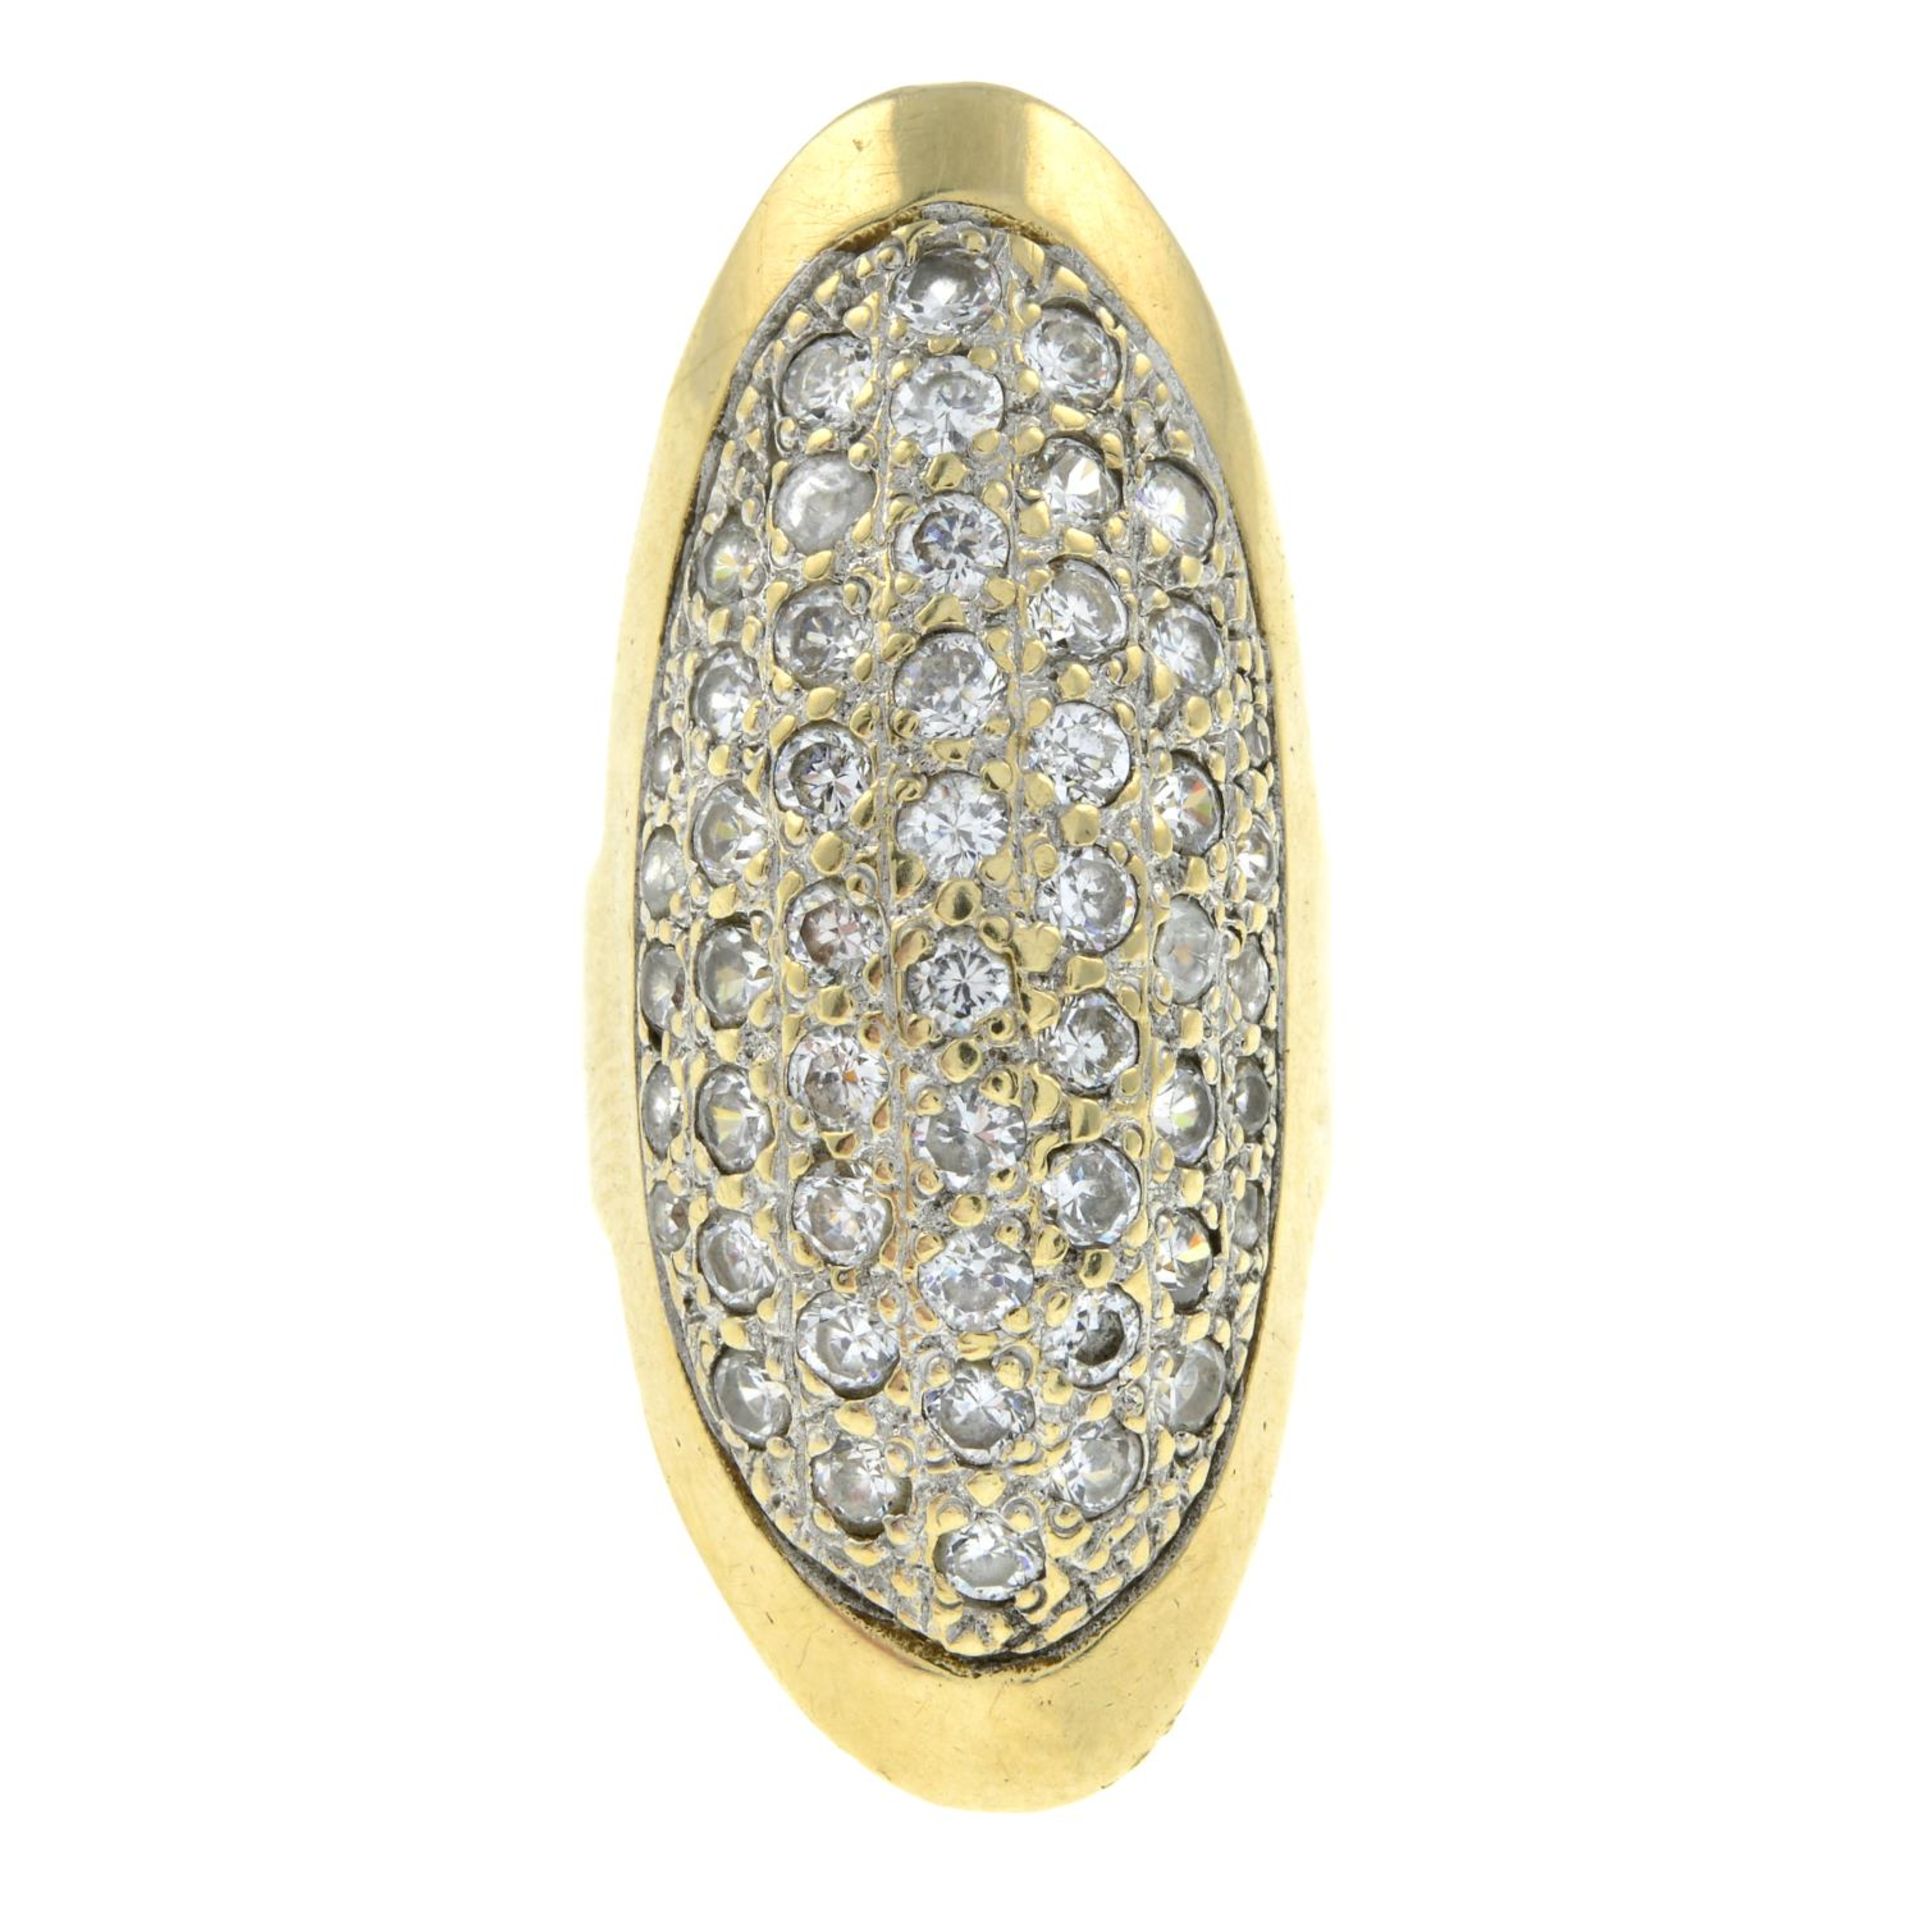 A 9ct gold cubic zirconia dress ring.Hallmarks for 9ct gold.